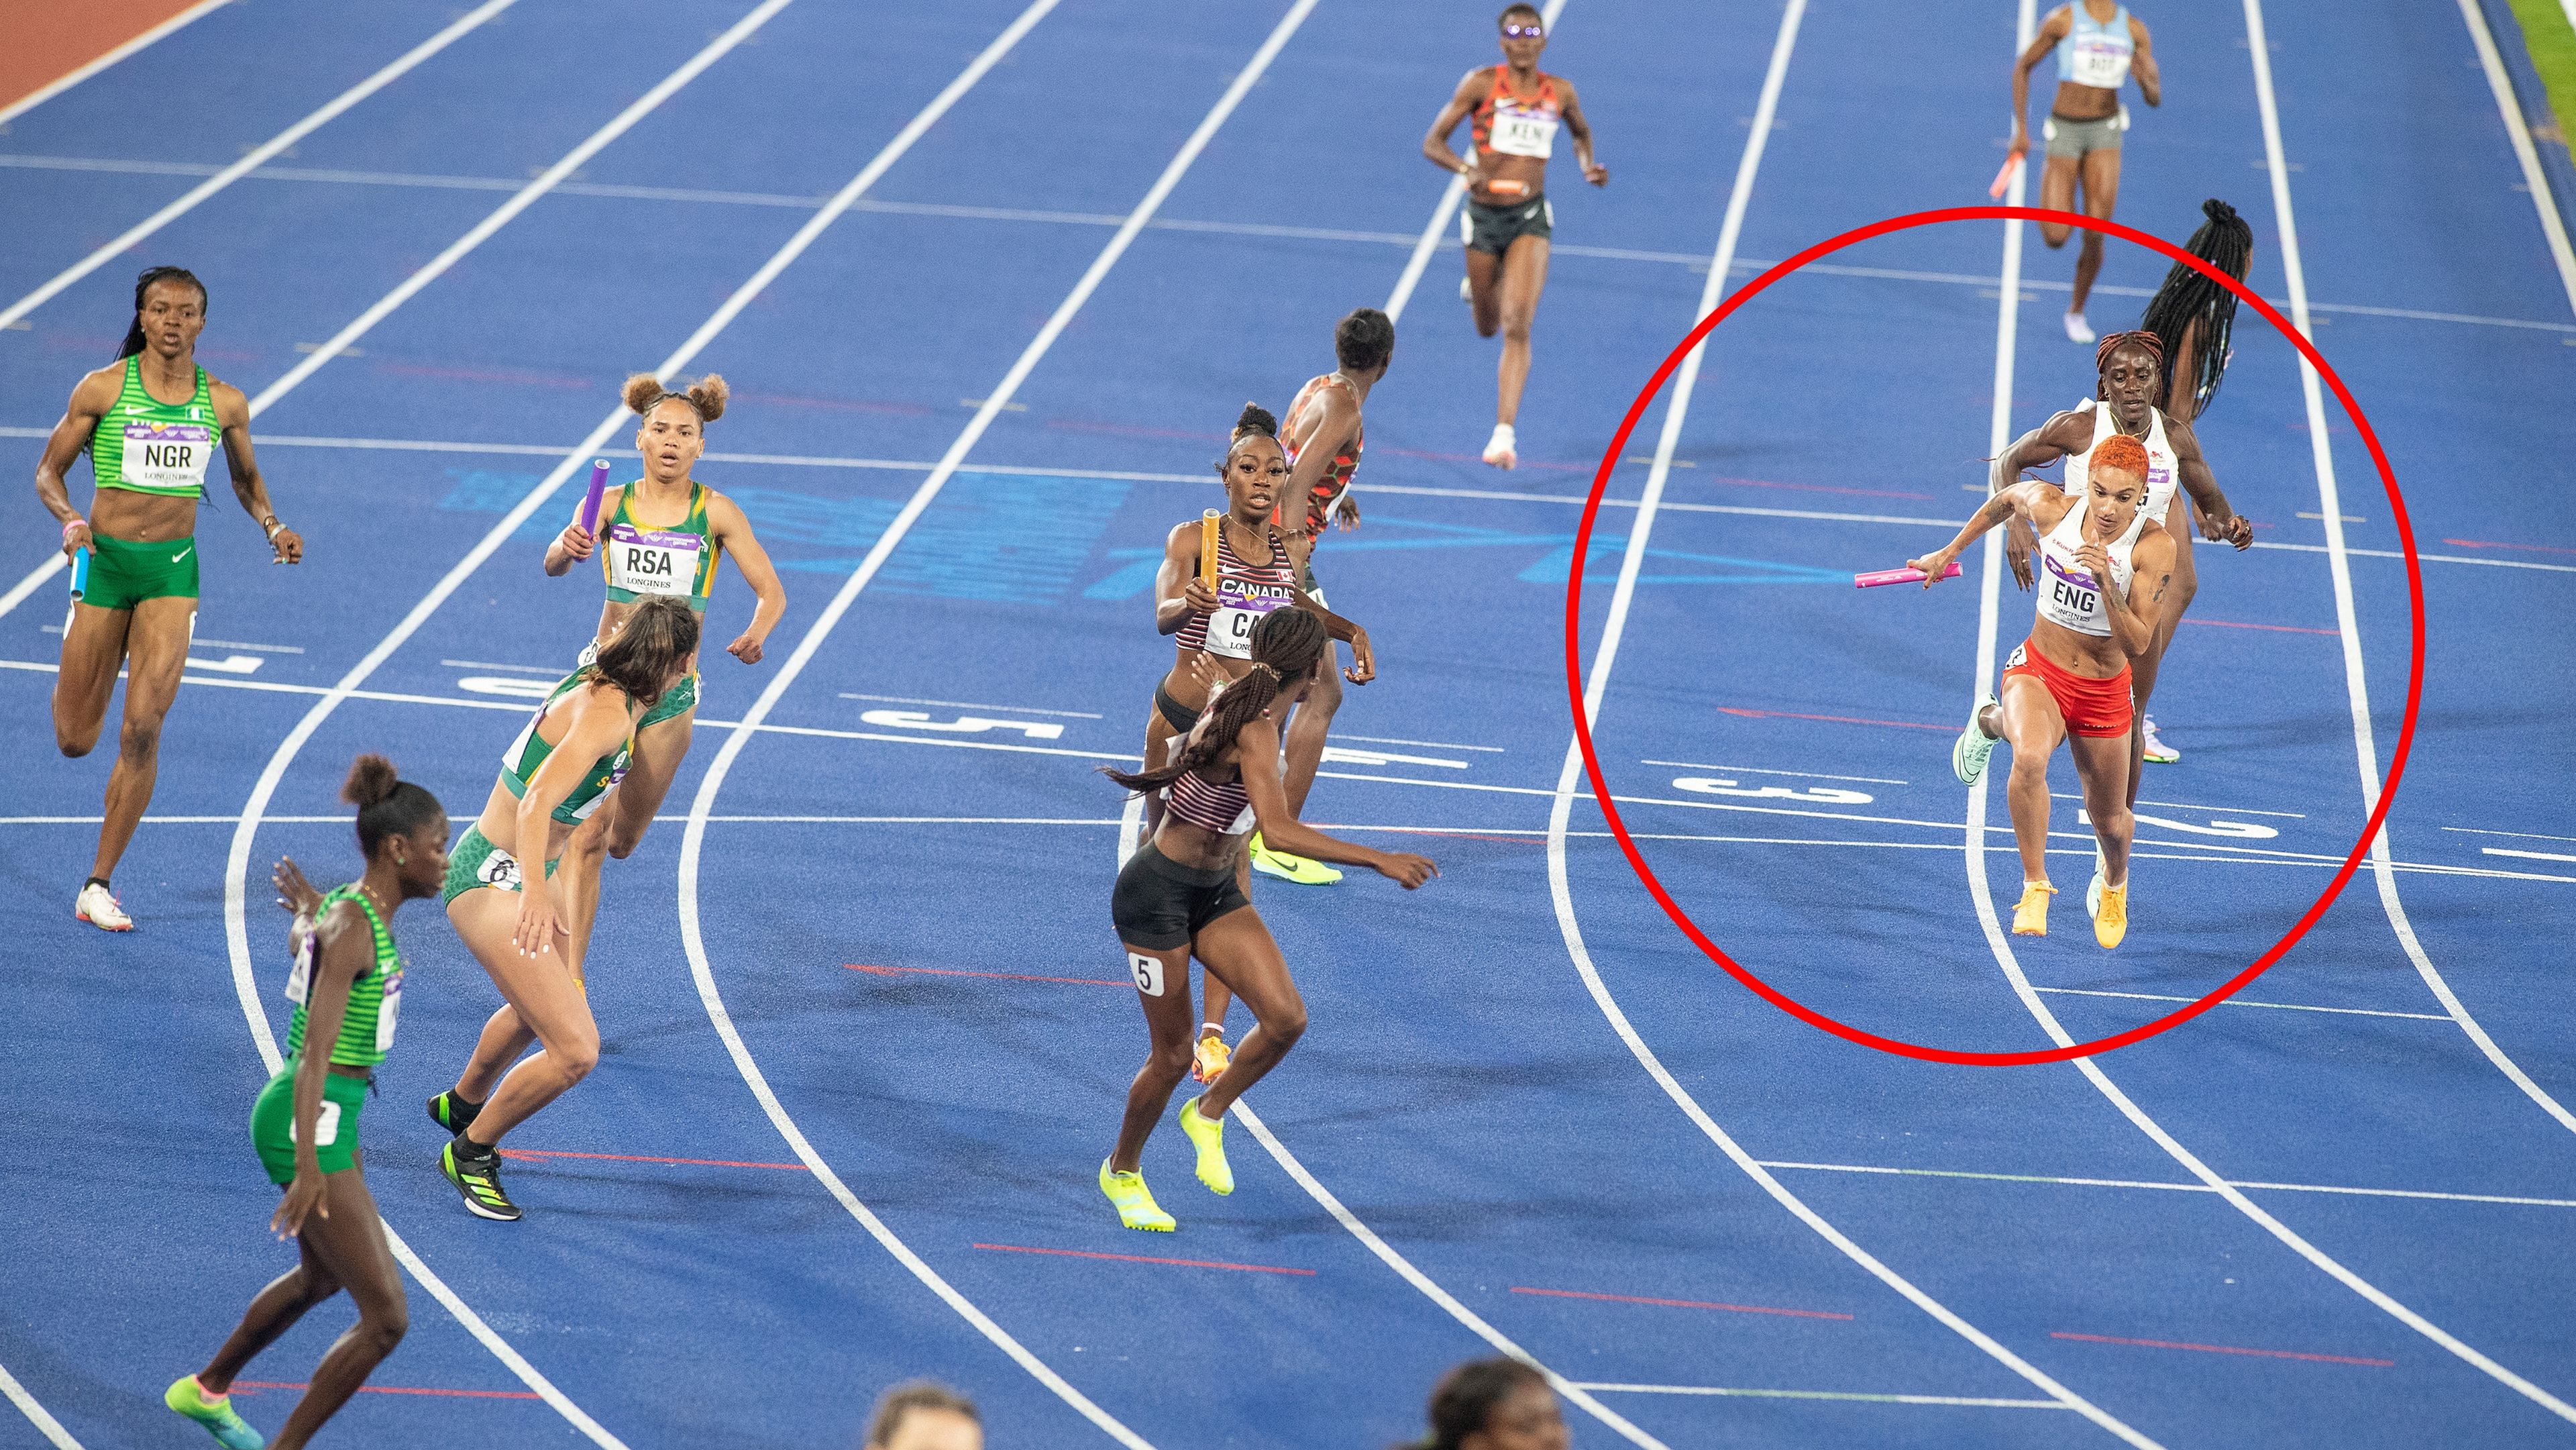 A review of the first baton change showed English runner Jodie Williams drift into the inside lane to her left (lane 2) as she positioned herself to receive the baton and take off.